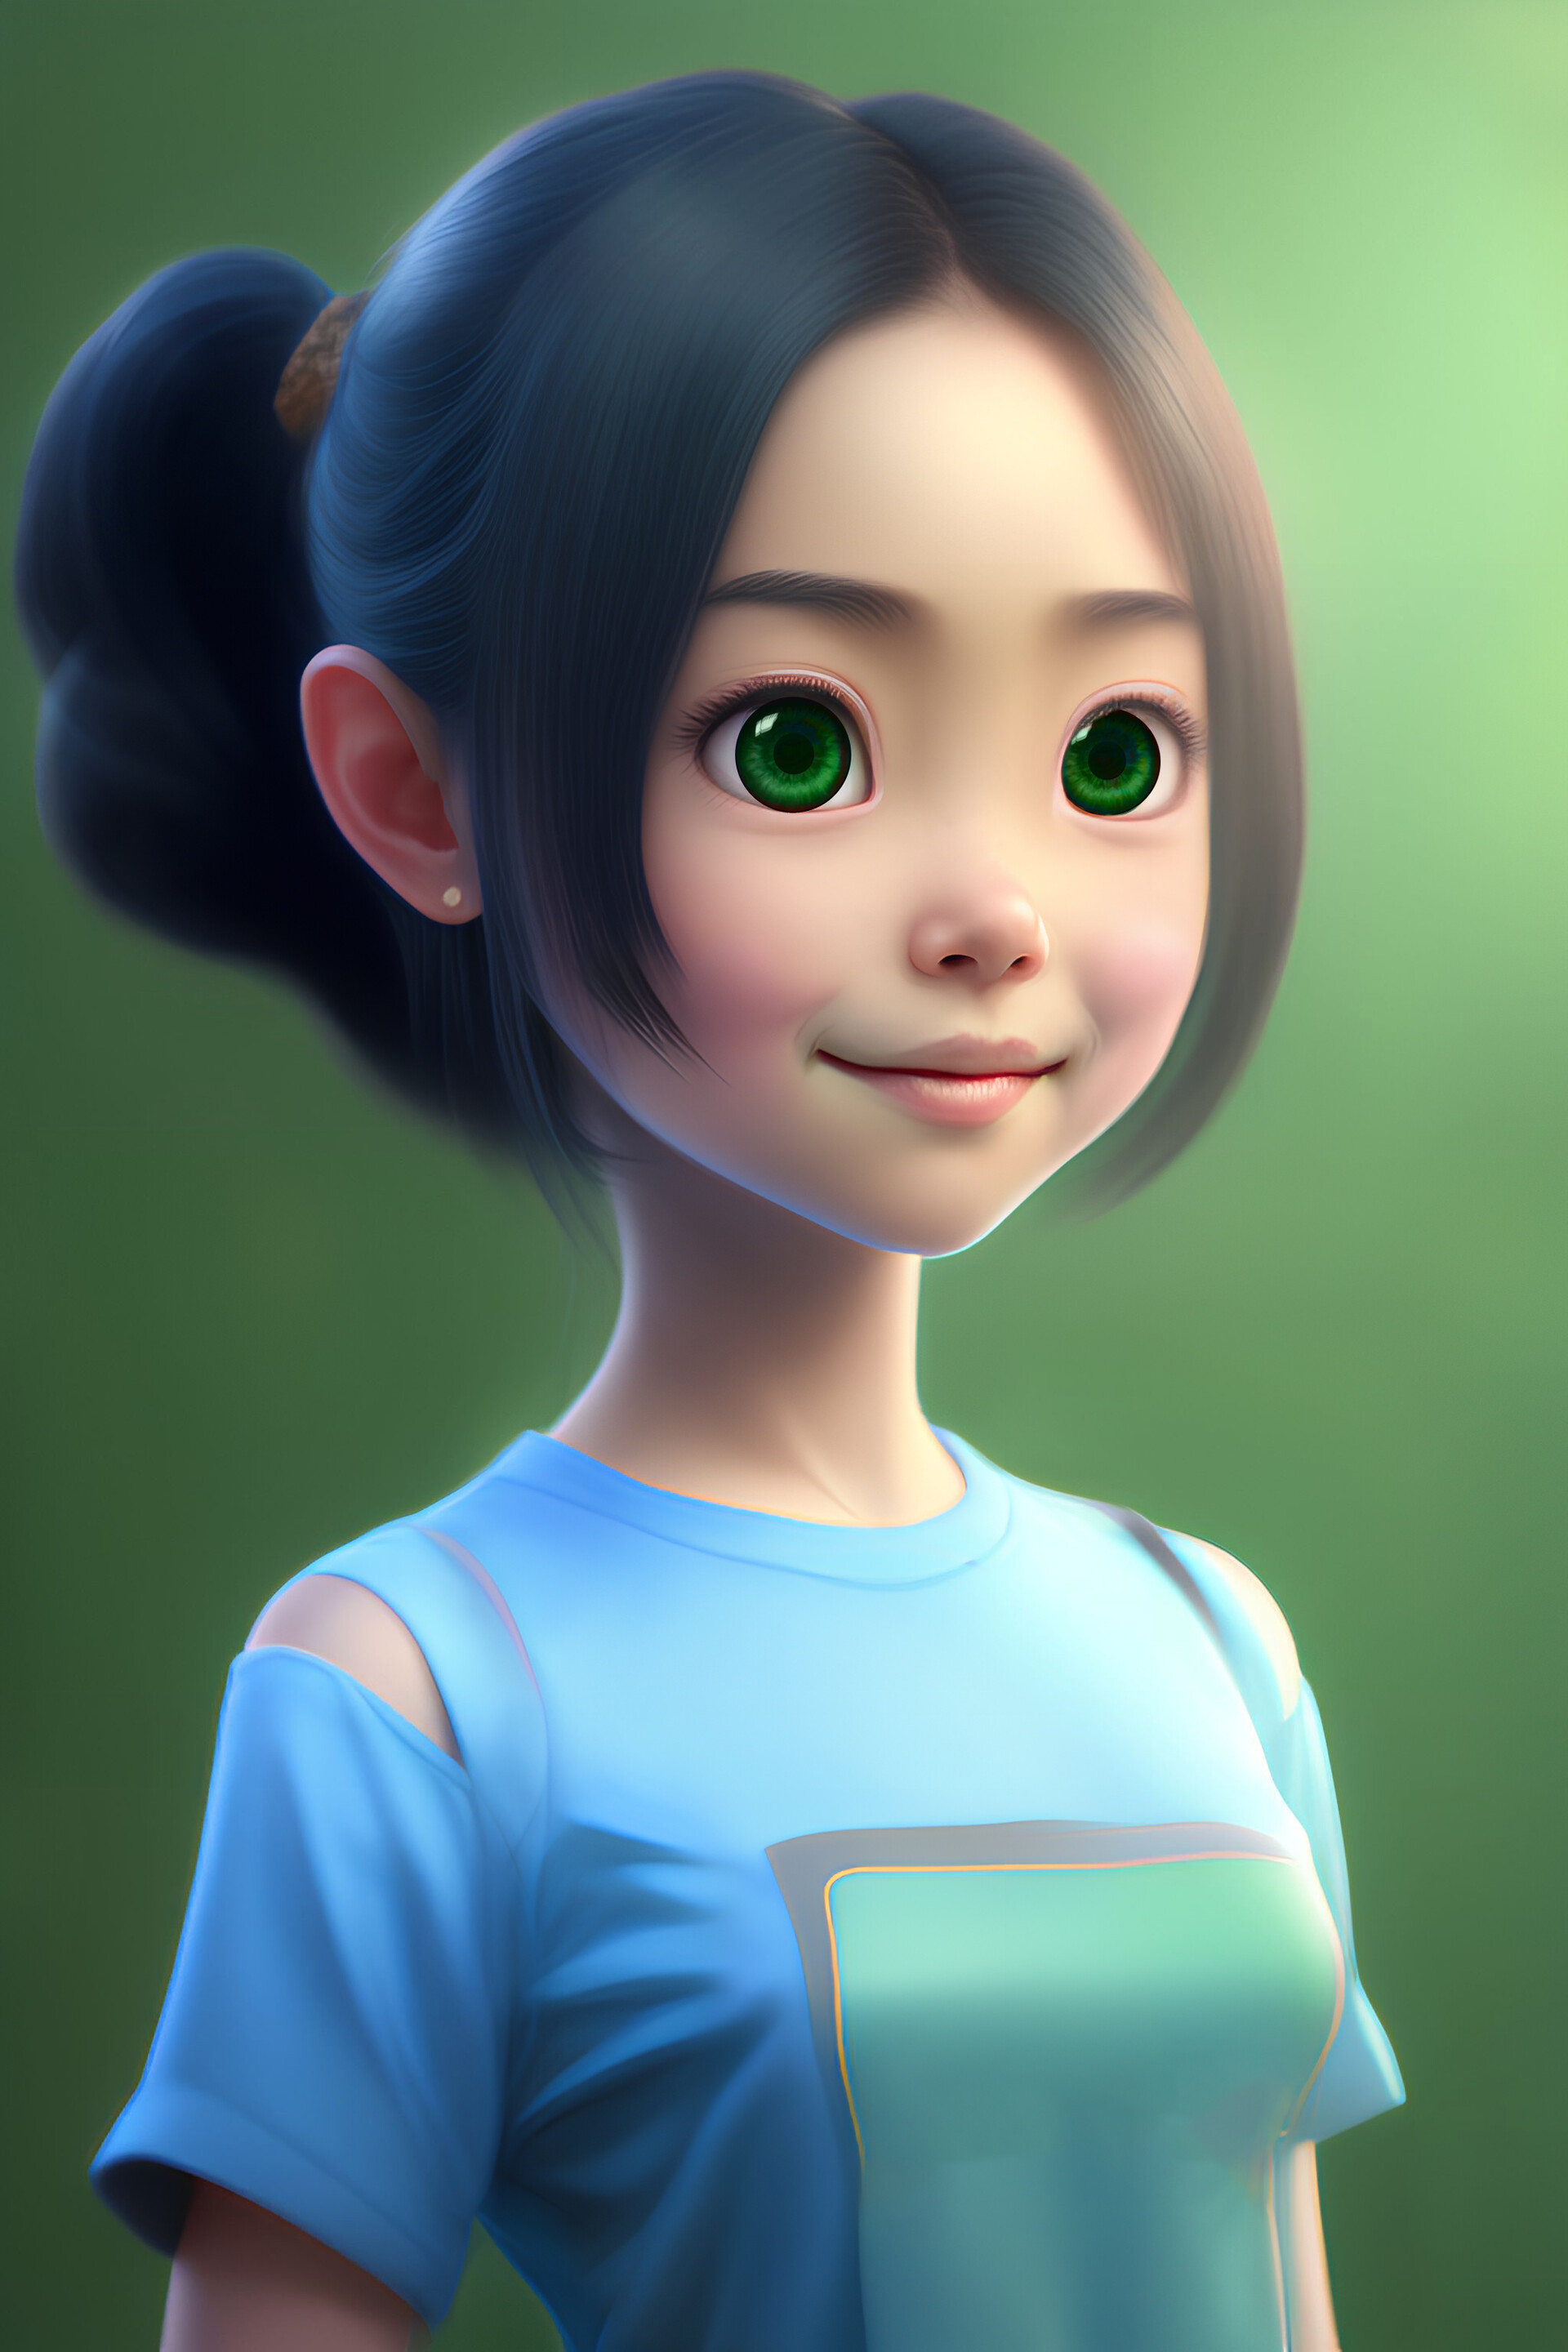 ArtStation - Portrait of a young Asian girl